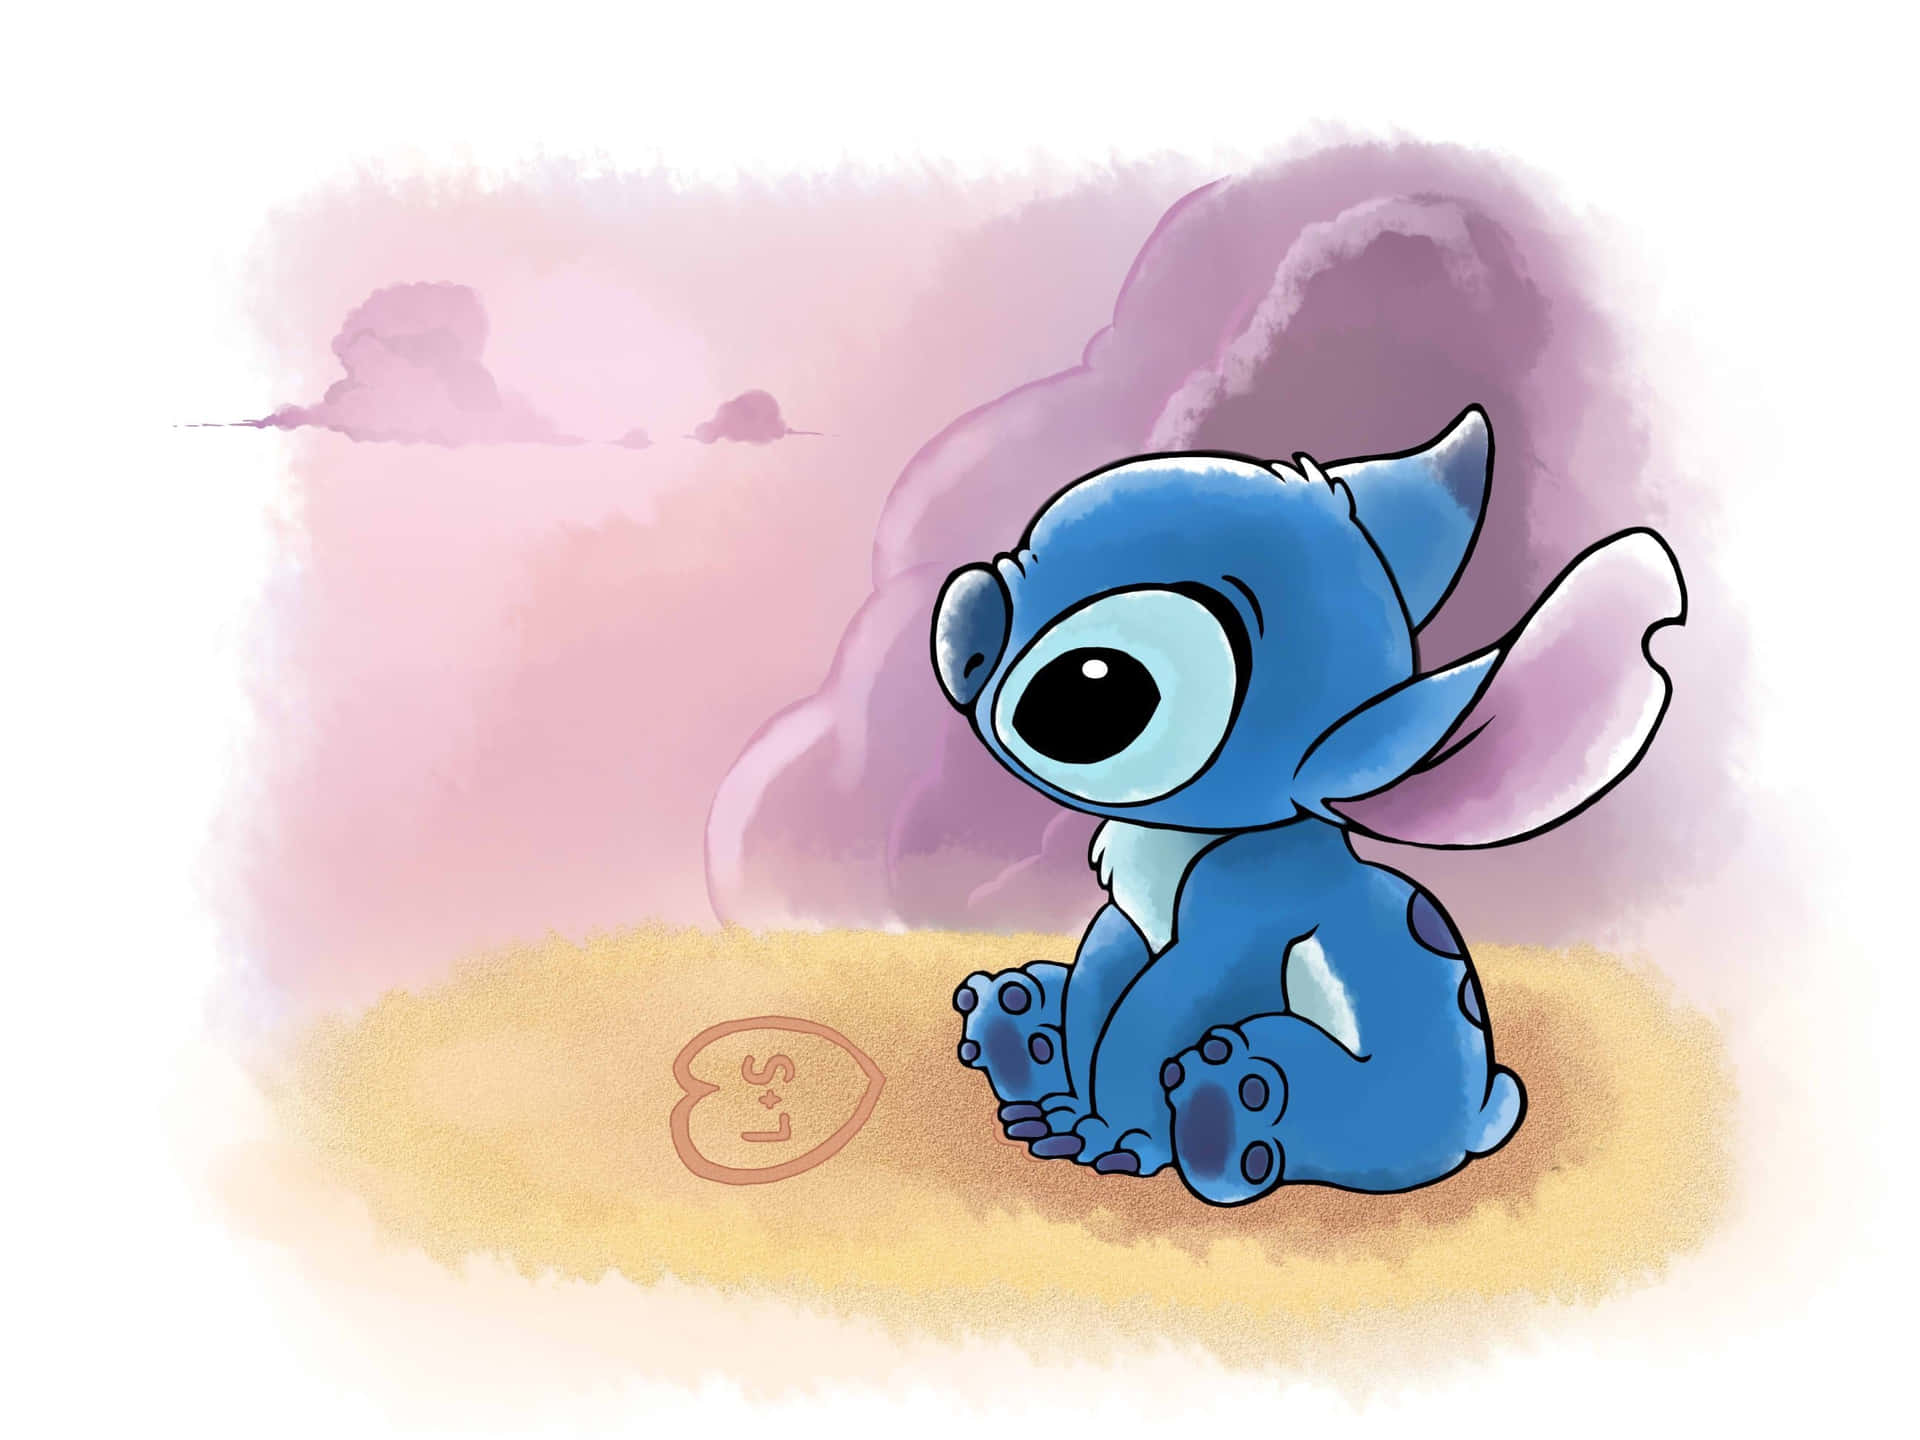 A cute Baby Stitch enjoying some downtime. Wallpaper